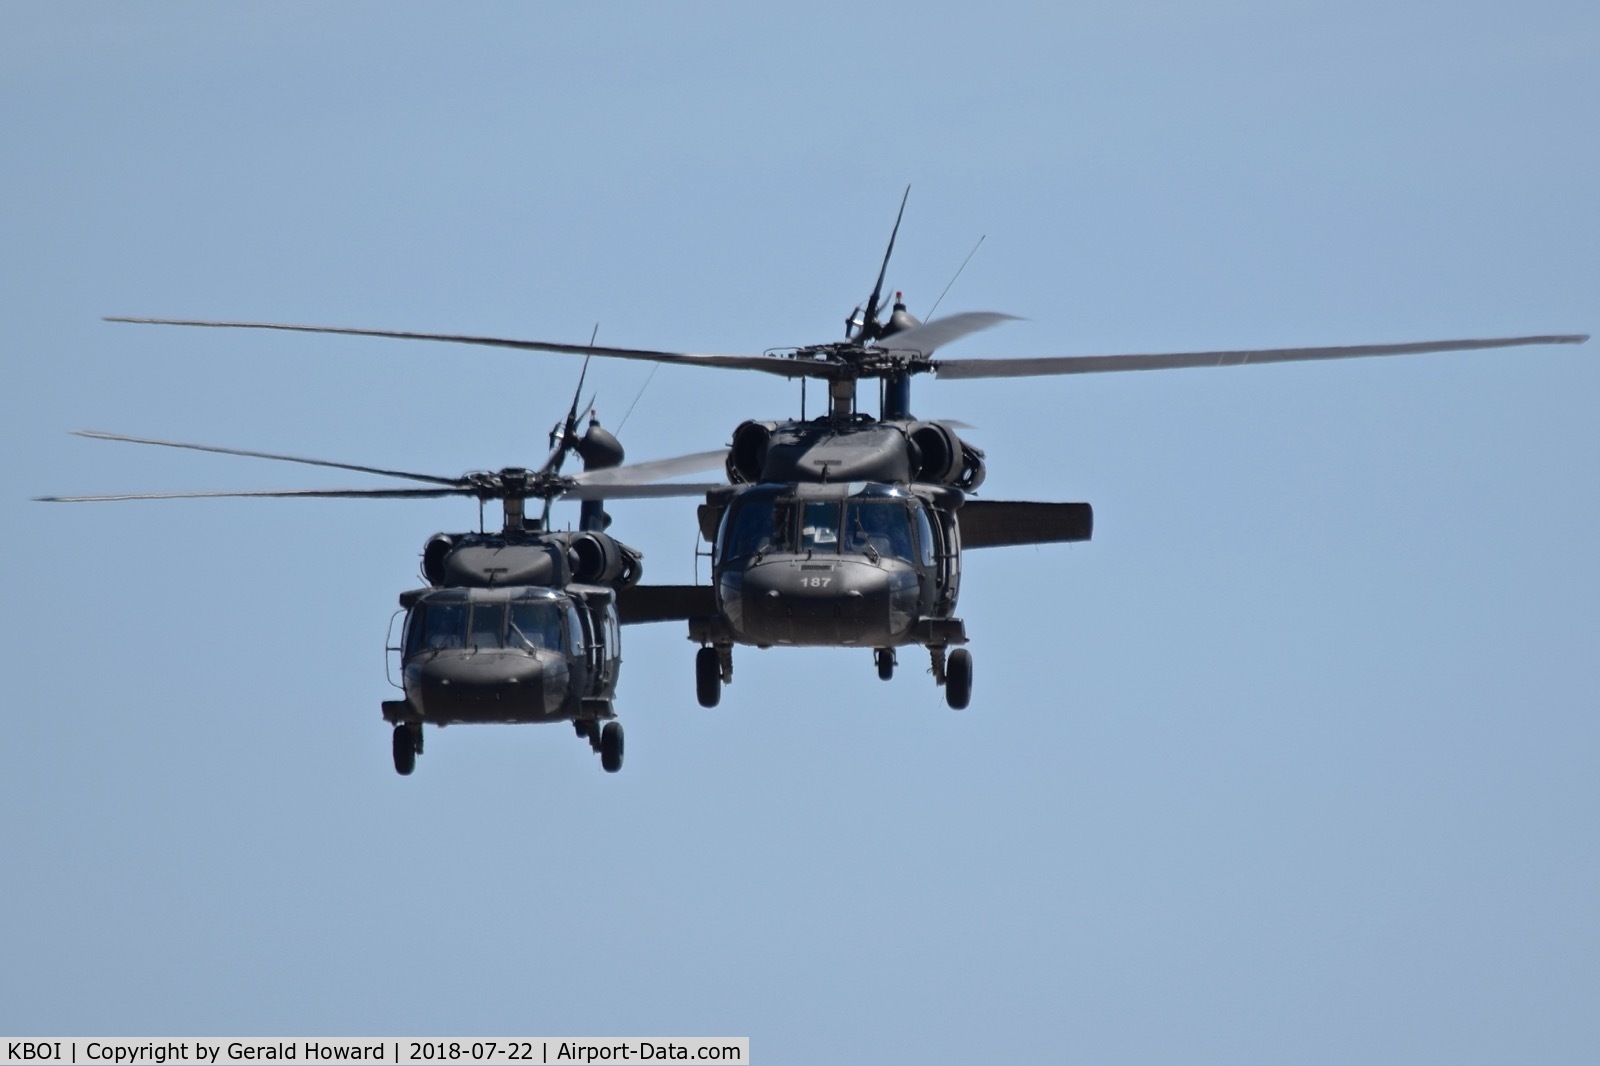 Boise Air Terminal/gowen Fld Airport (BOI) - Two UH-60Ls from the 1-183rd AVN BN, Idaho Army National Guard.
